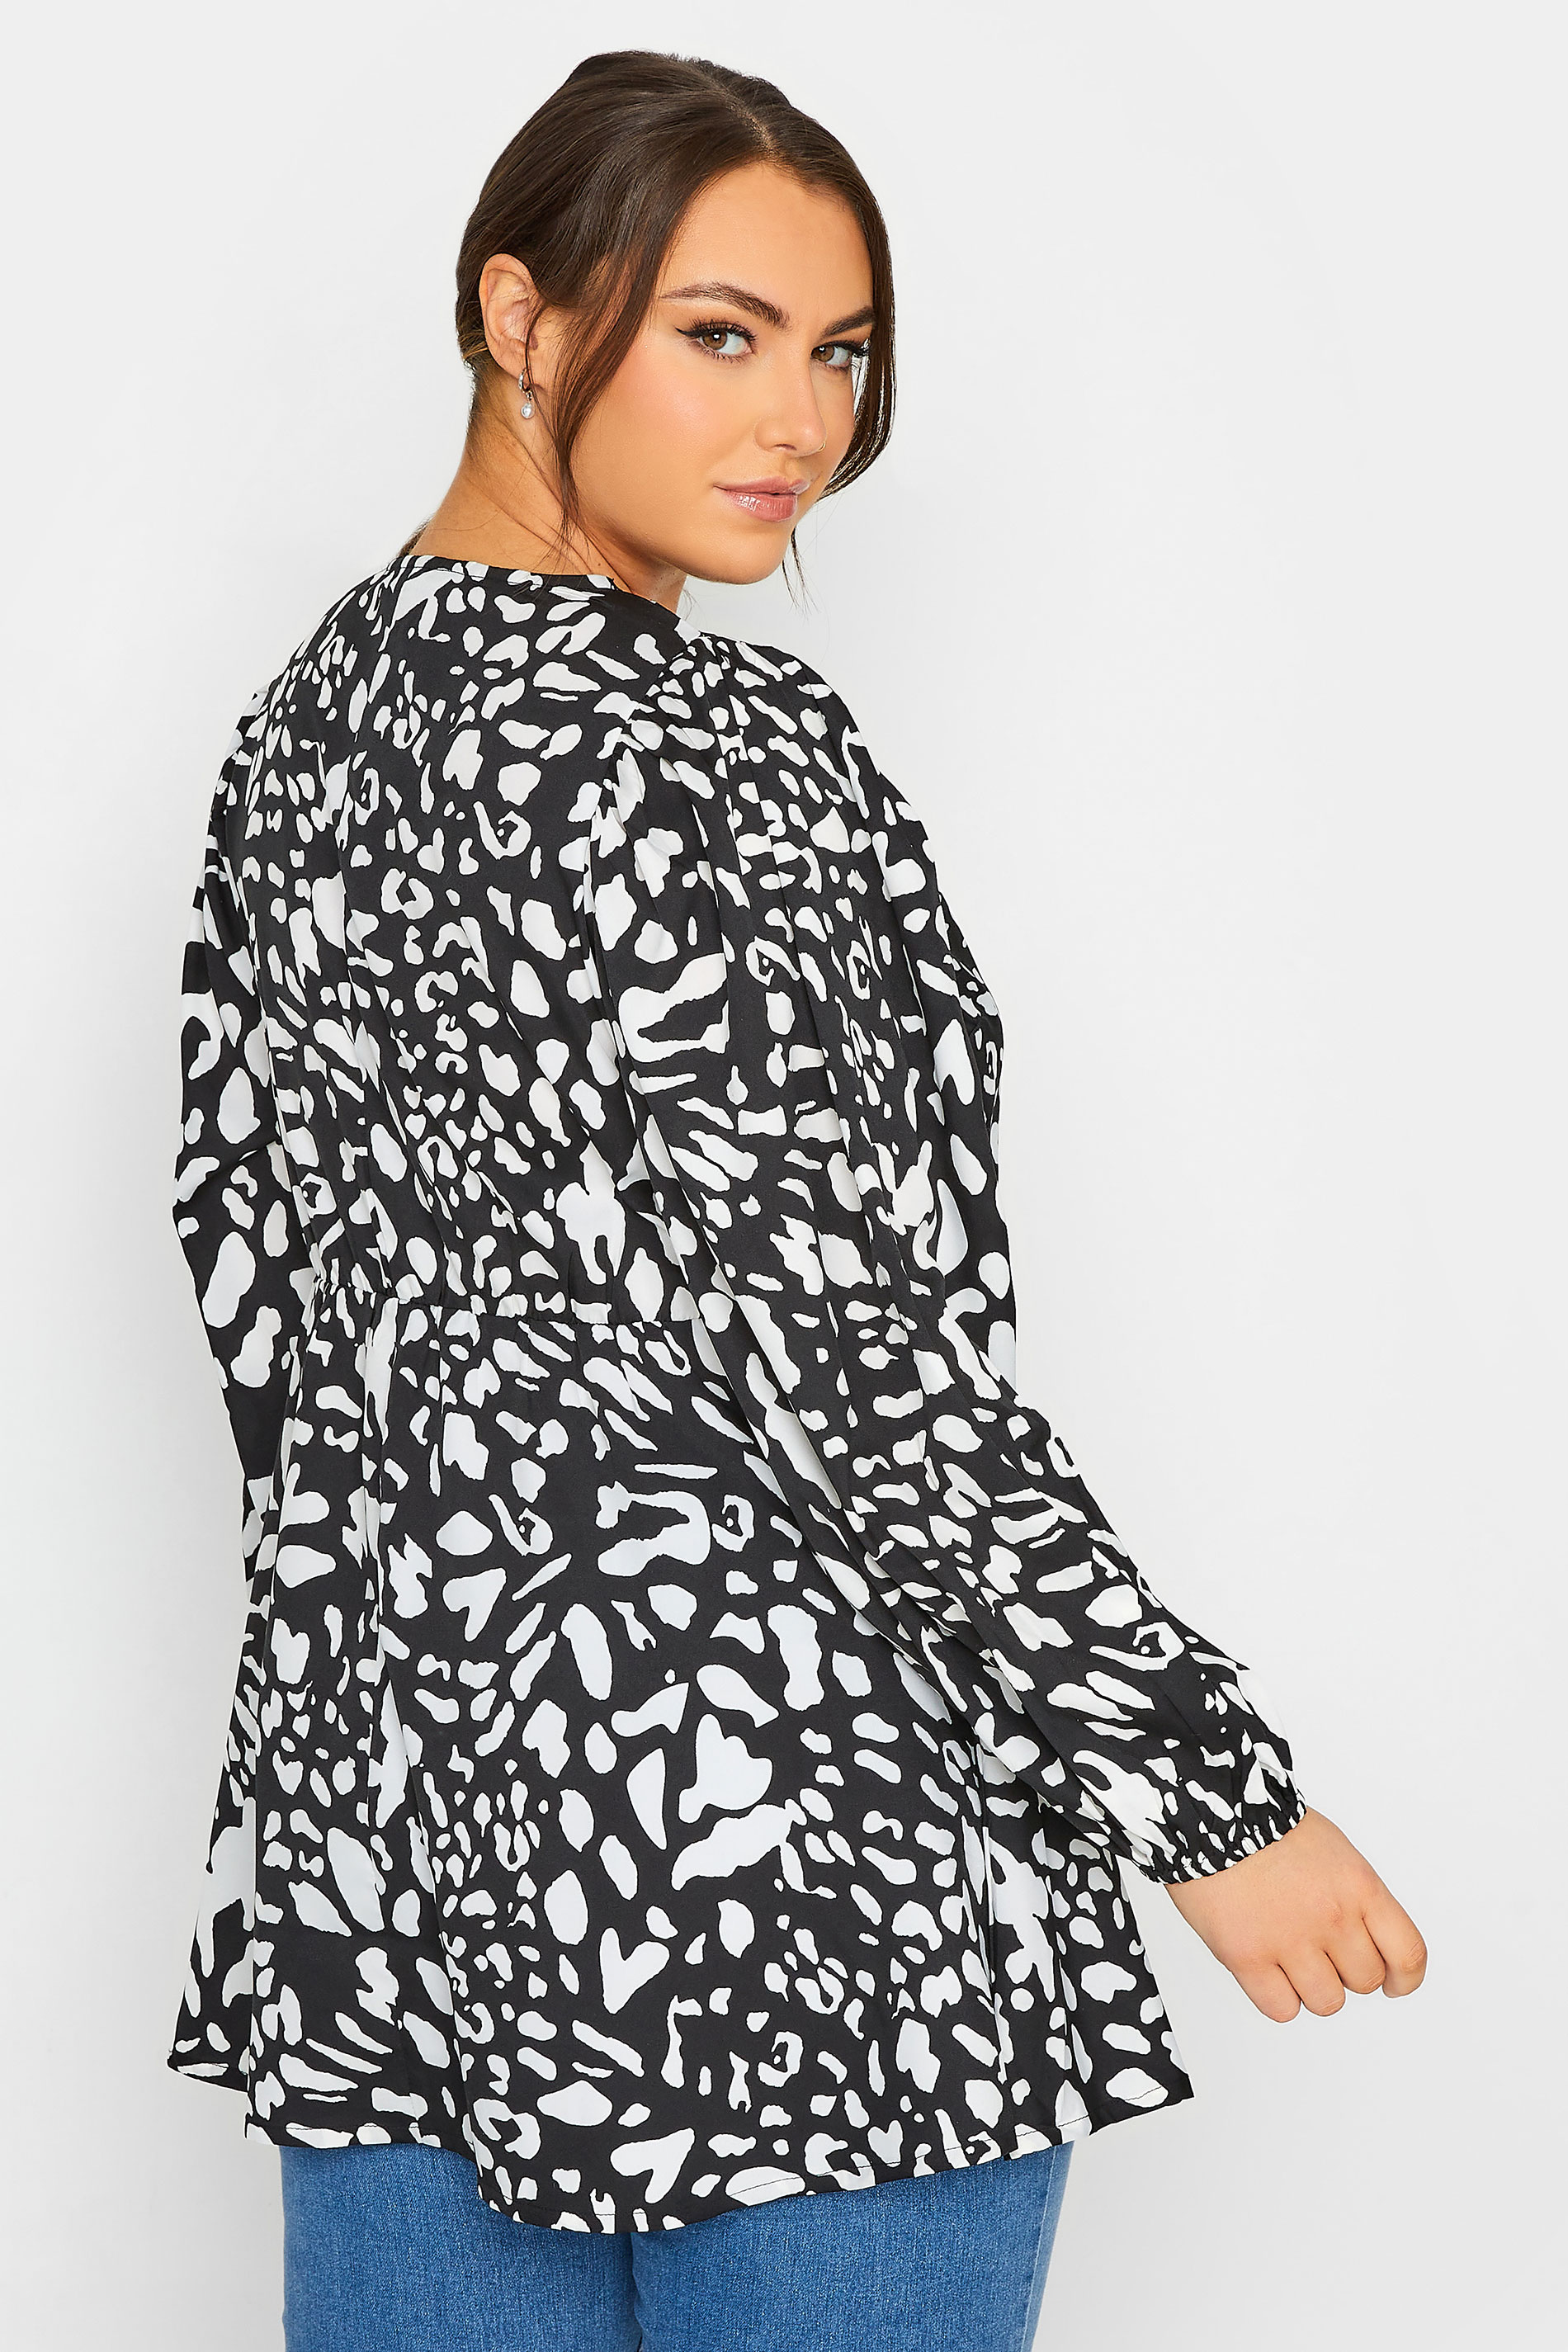 LIMITED COLLECTION Plus Size Black Animal Print Lace Blouse | Yours Clothing 3